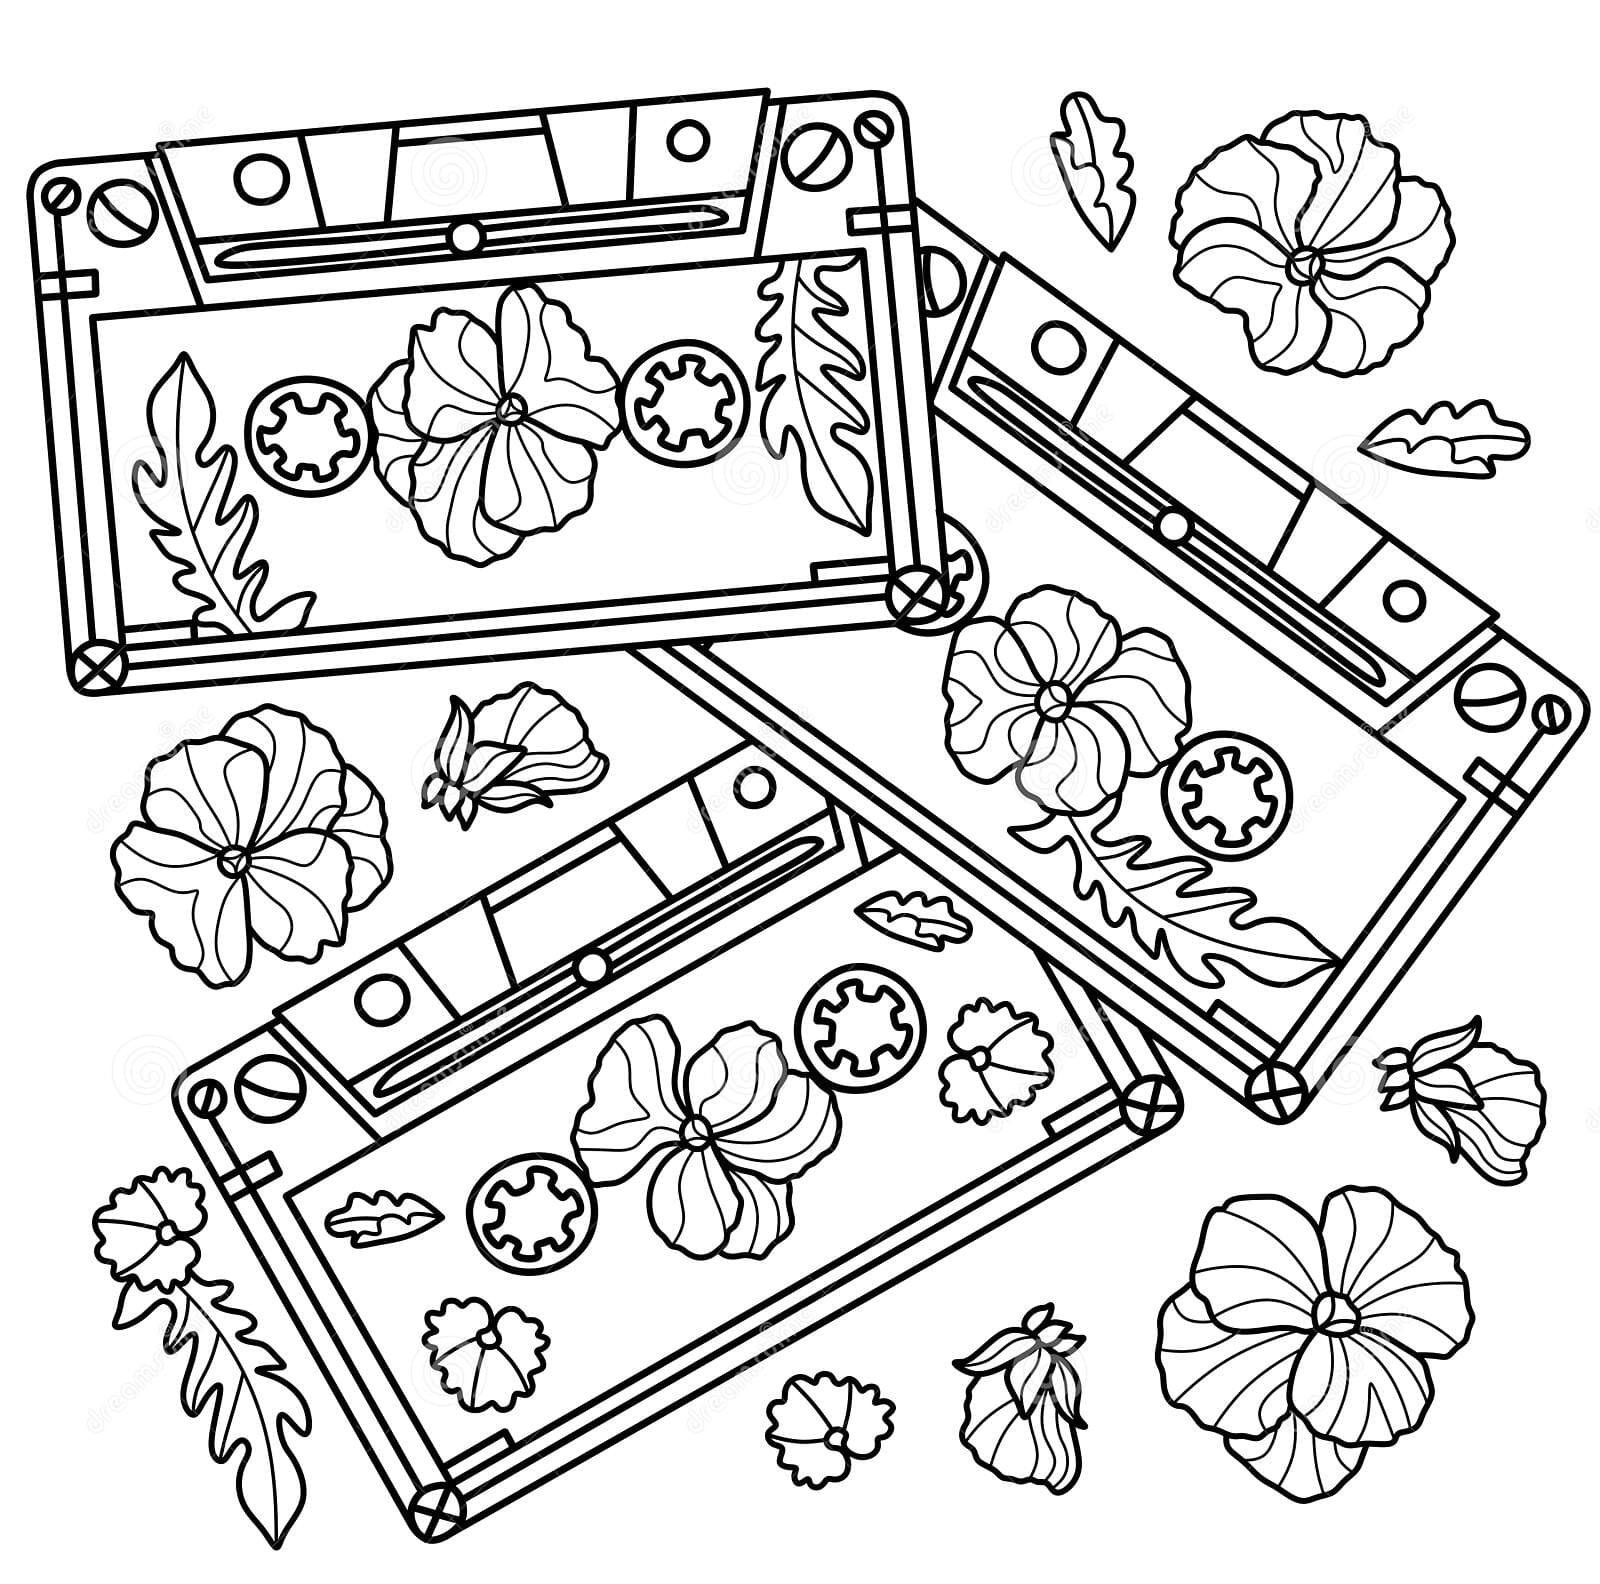 Cassettes And Pansies Coloring Page